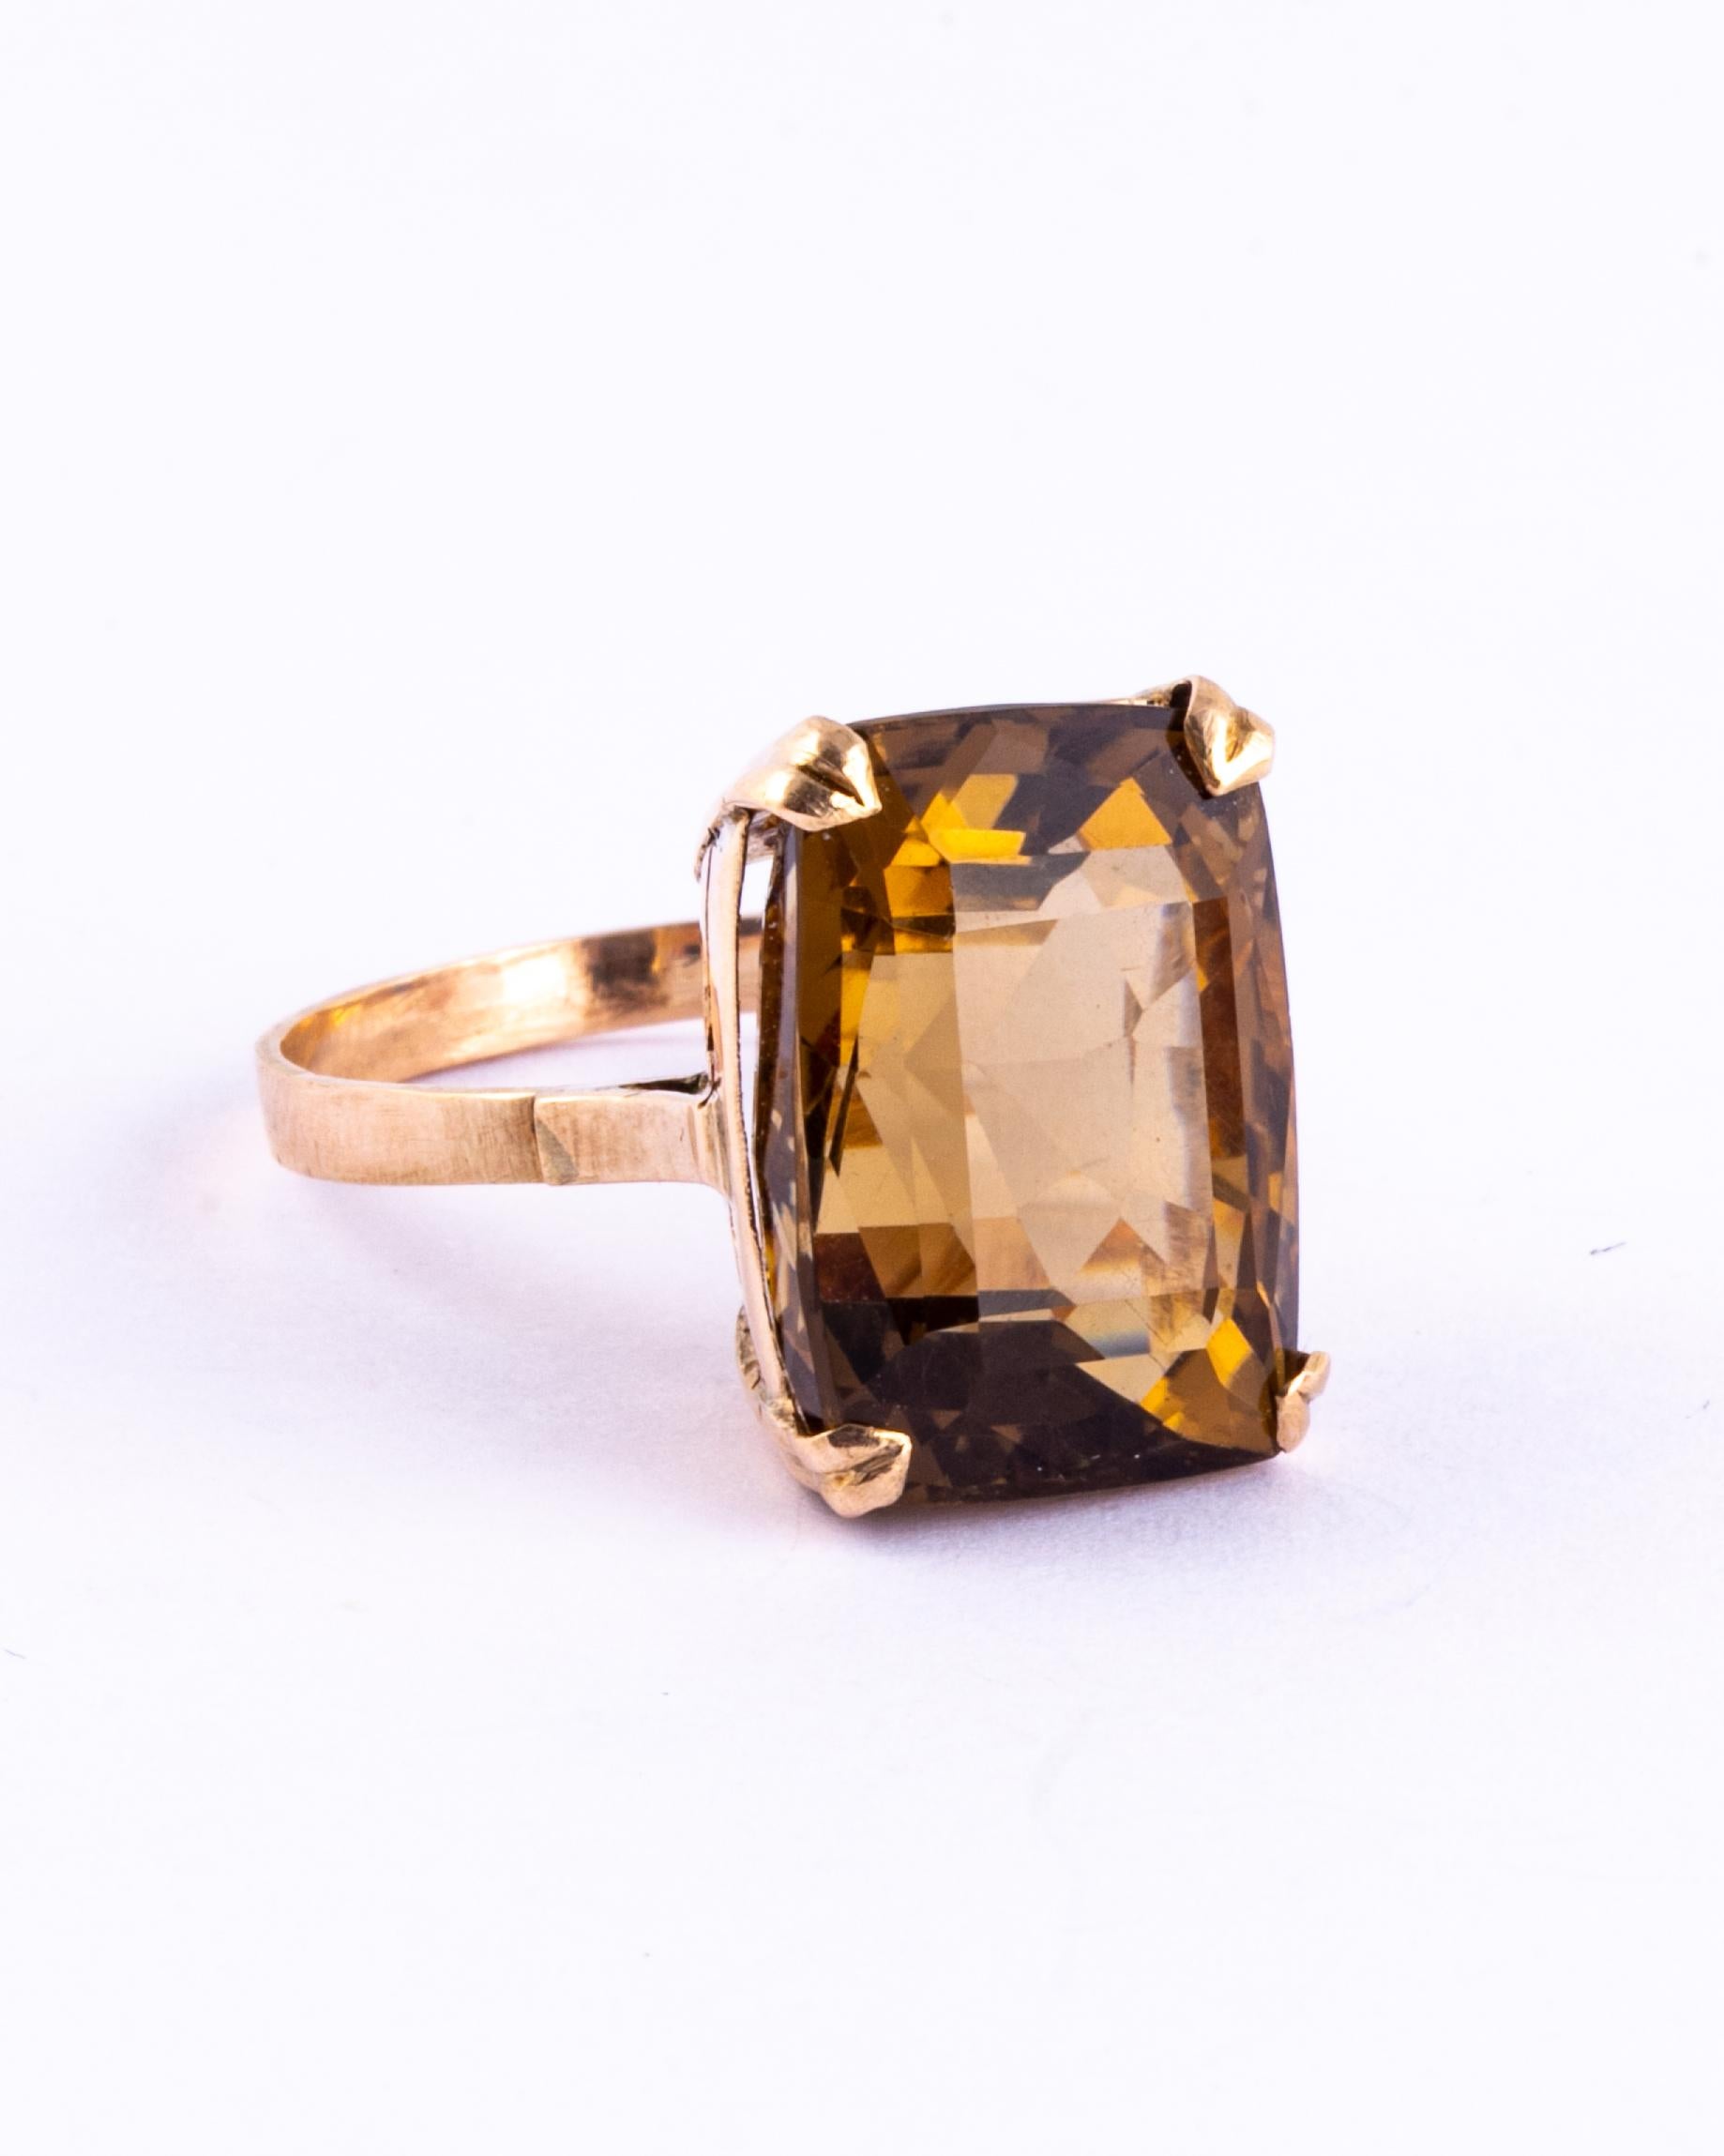 The gorgeous citrine stone in this ring is a lovely deep yellow colour and is set in simple claws. The gallery is ornate with scroll detail all modelled in 9carat gold. 

Ring Size: P or 7 1/2 
Stone Dimensions: 17x12mm
Height Off Finger: 10mm